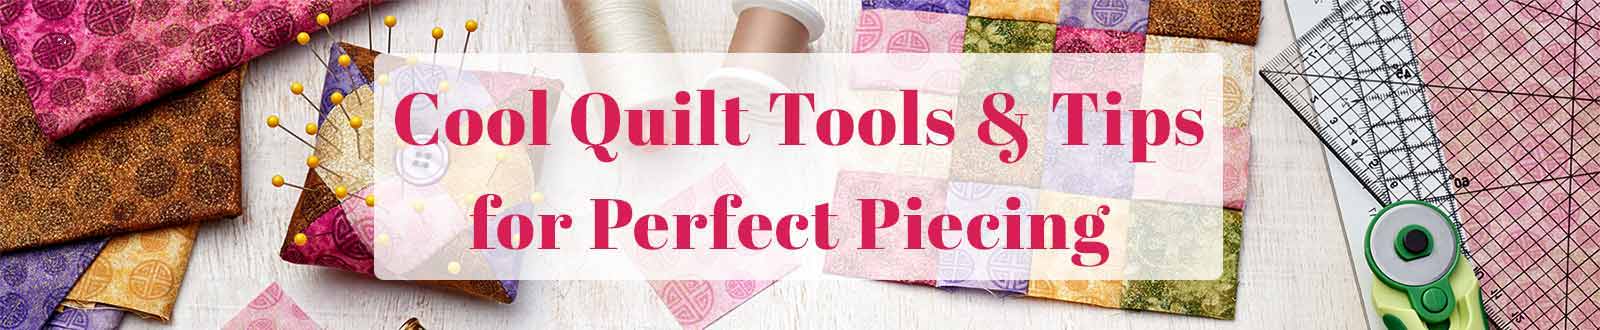 Cool Quilt Tools & Tips by Guidelines4Quilting